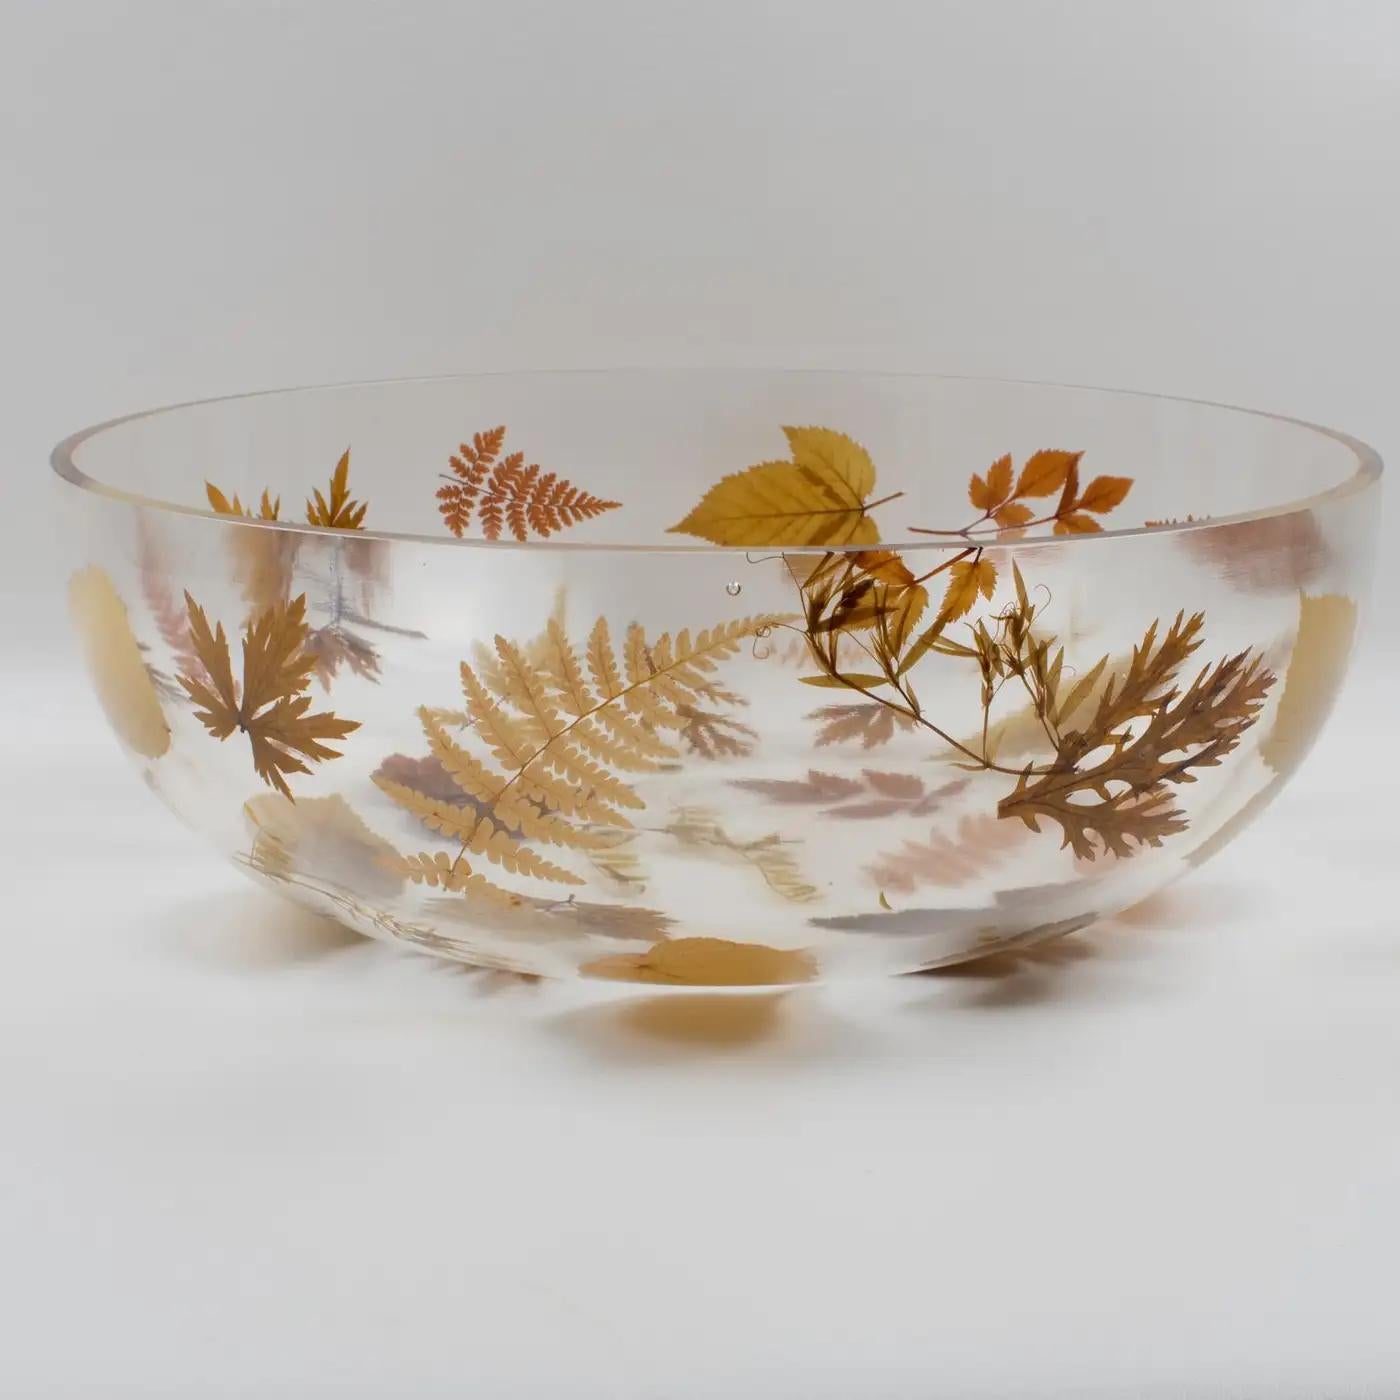 Resinplast, Italy, designed this gorgeous decorative Resin bowl, centerpiece, or serving dish in the 1970s. This extra-thick transparent resin or acrylic deep-rounded oversized bowl shape has assorted real autumn leaves and dried flowers embedded in